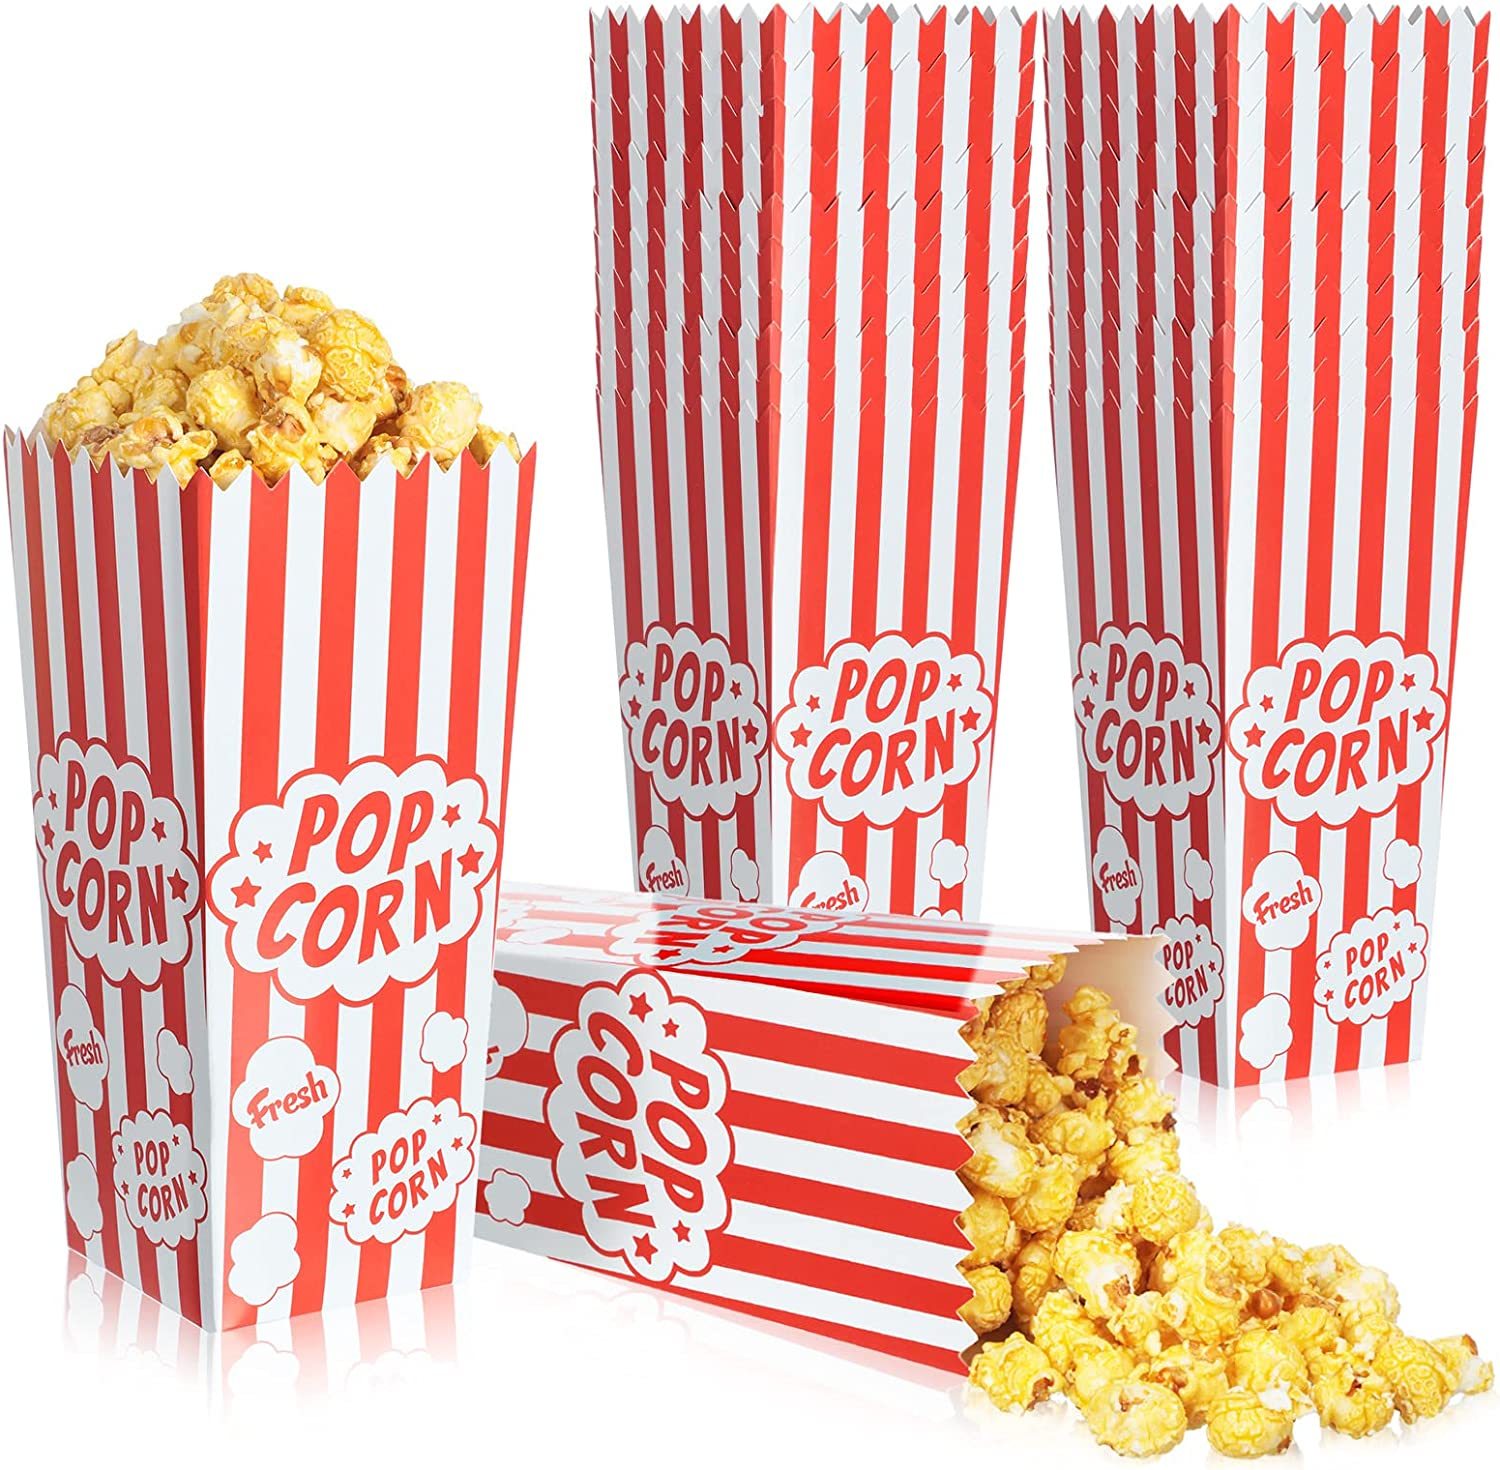 Primary image for 200 Pcs. Popcorn Boxes 46 Oz Popcorn Containers Red And White Striped Popcorn